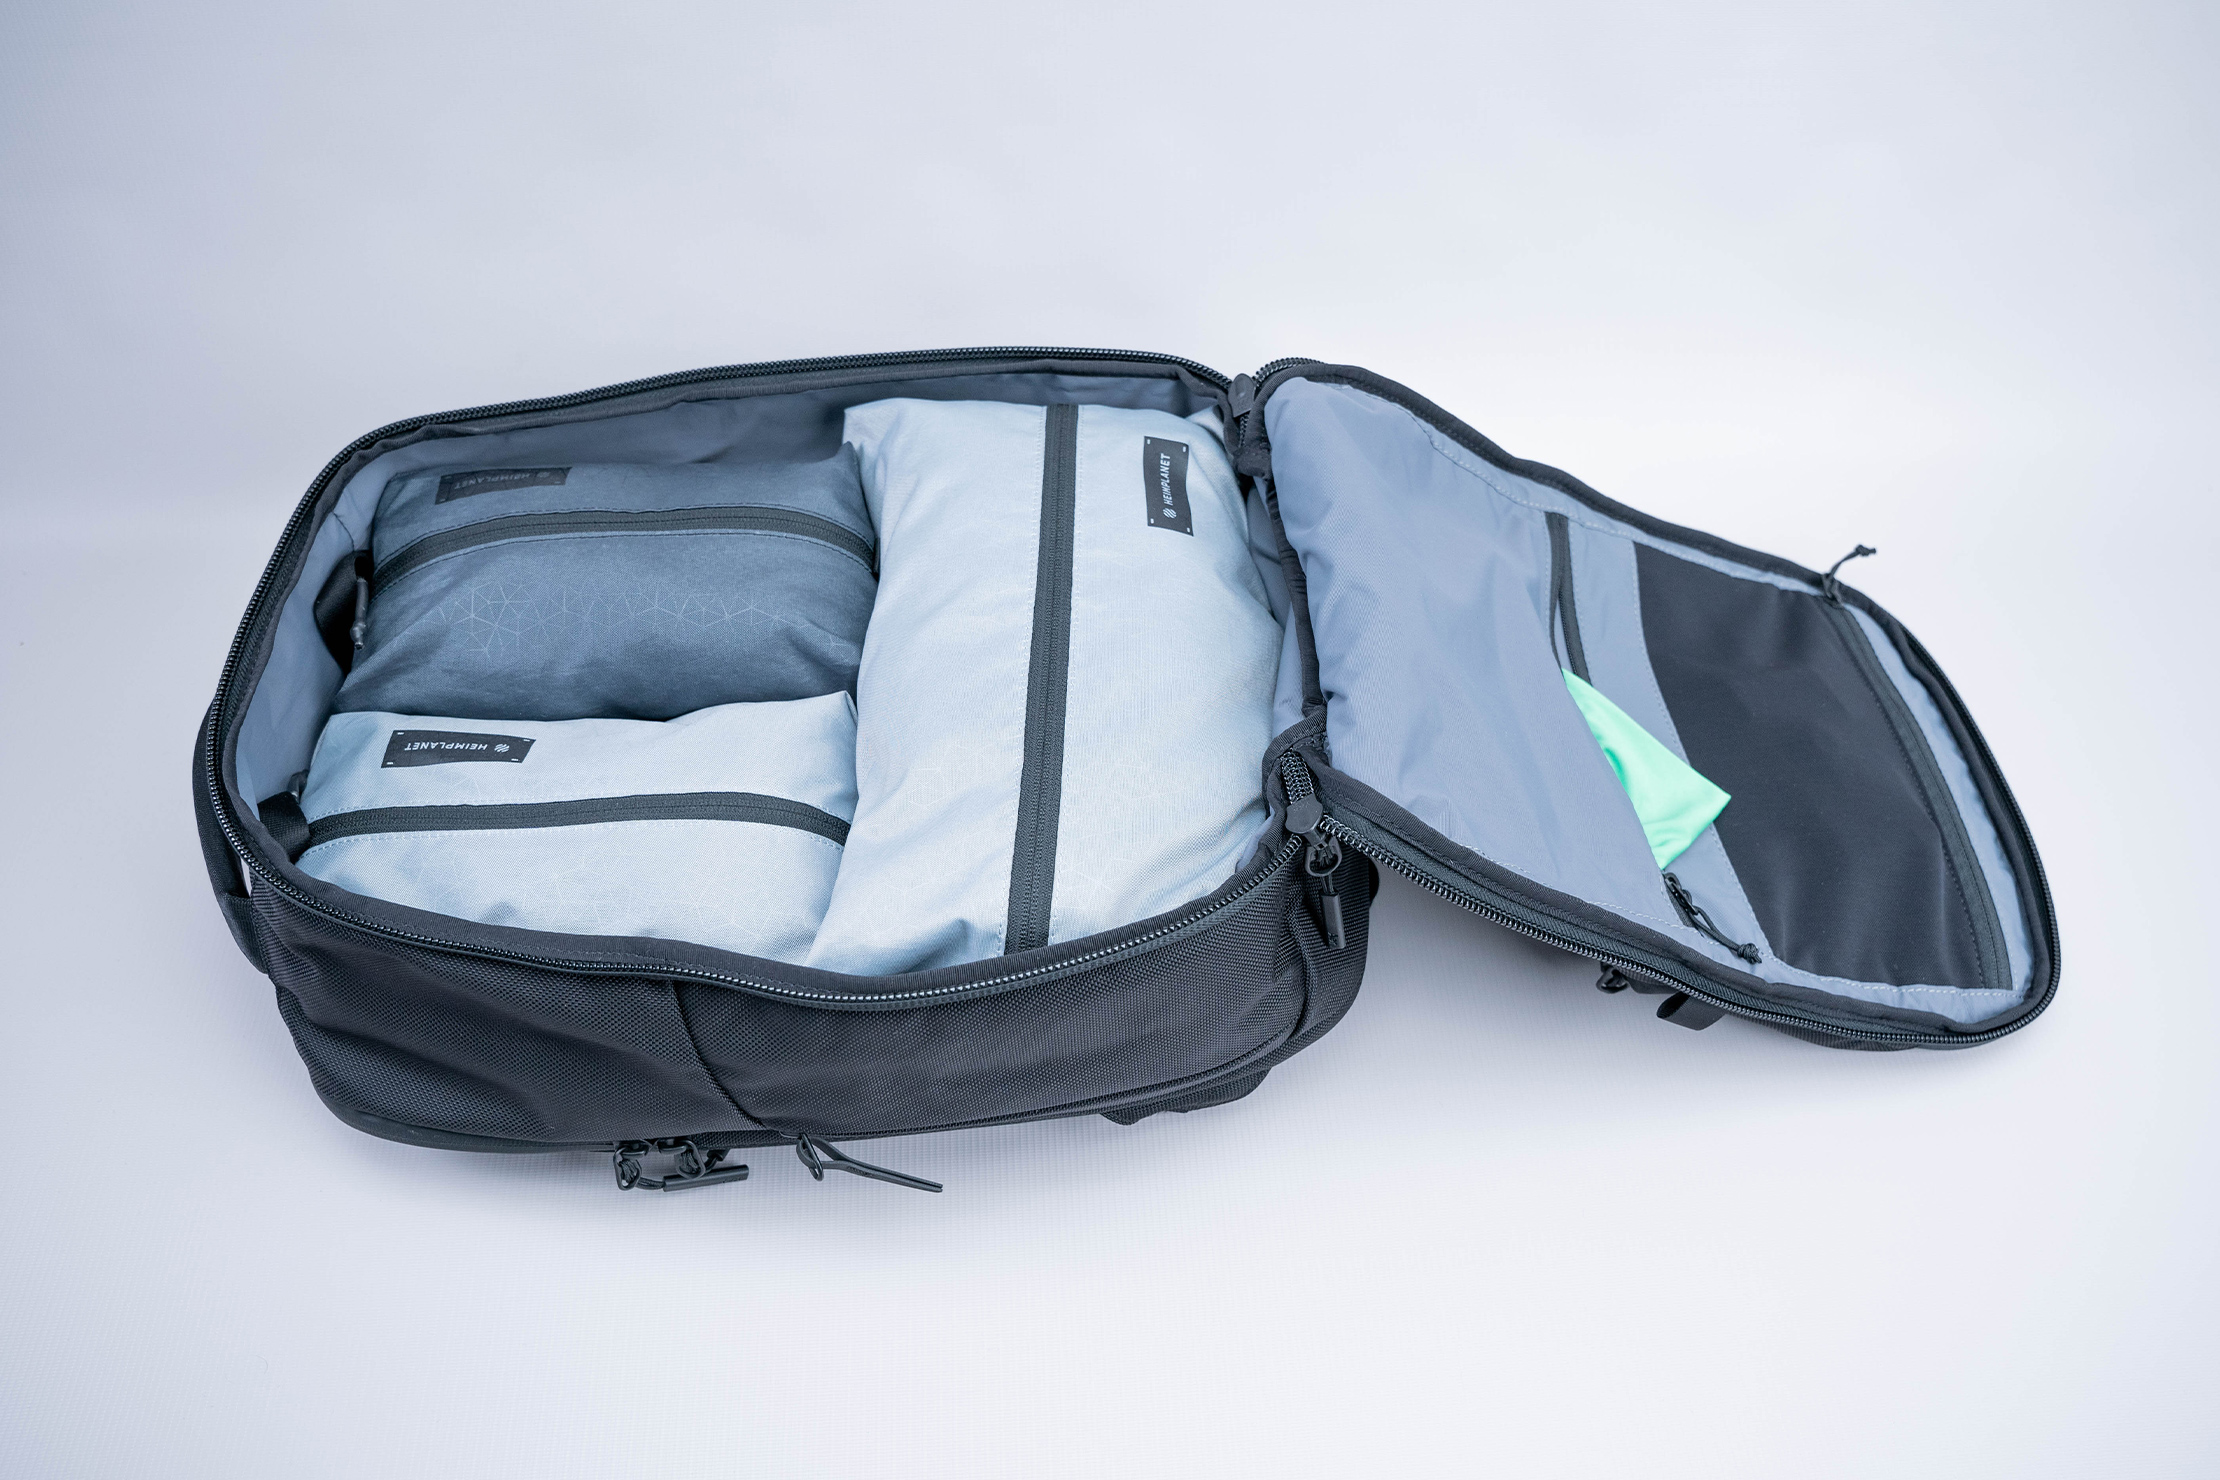 Aer City Pack Pro Packing Cubes